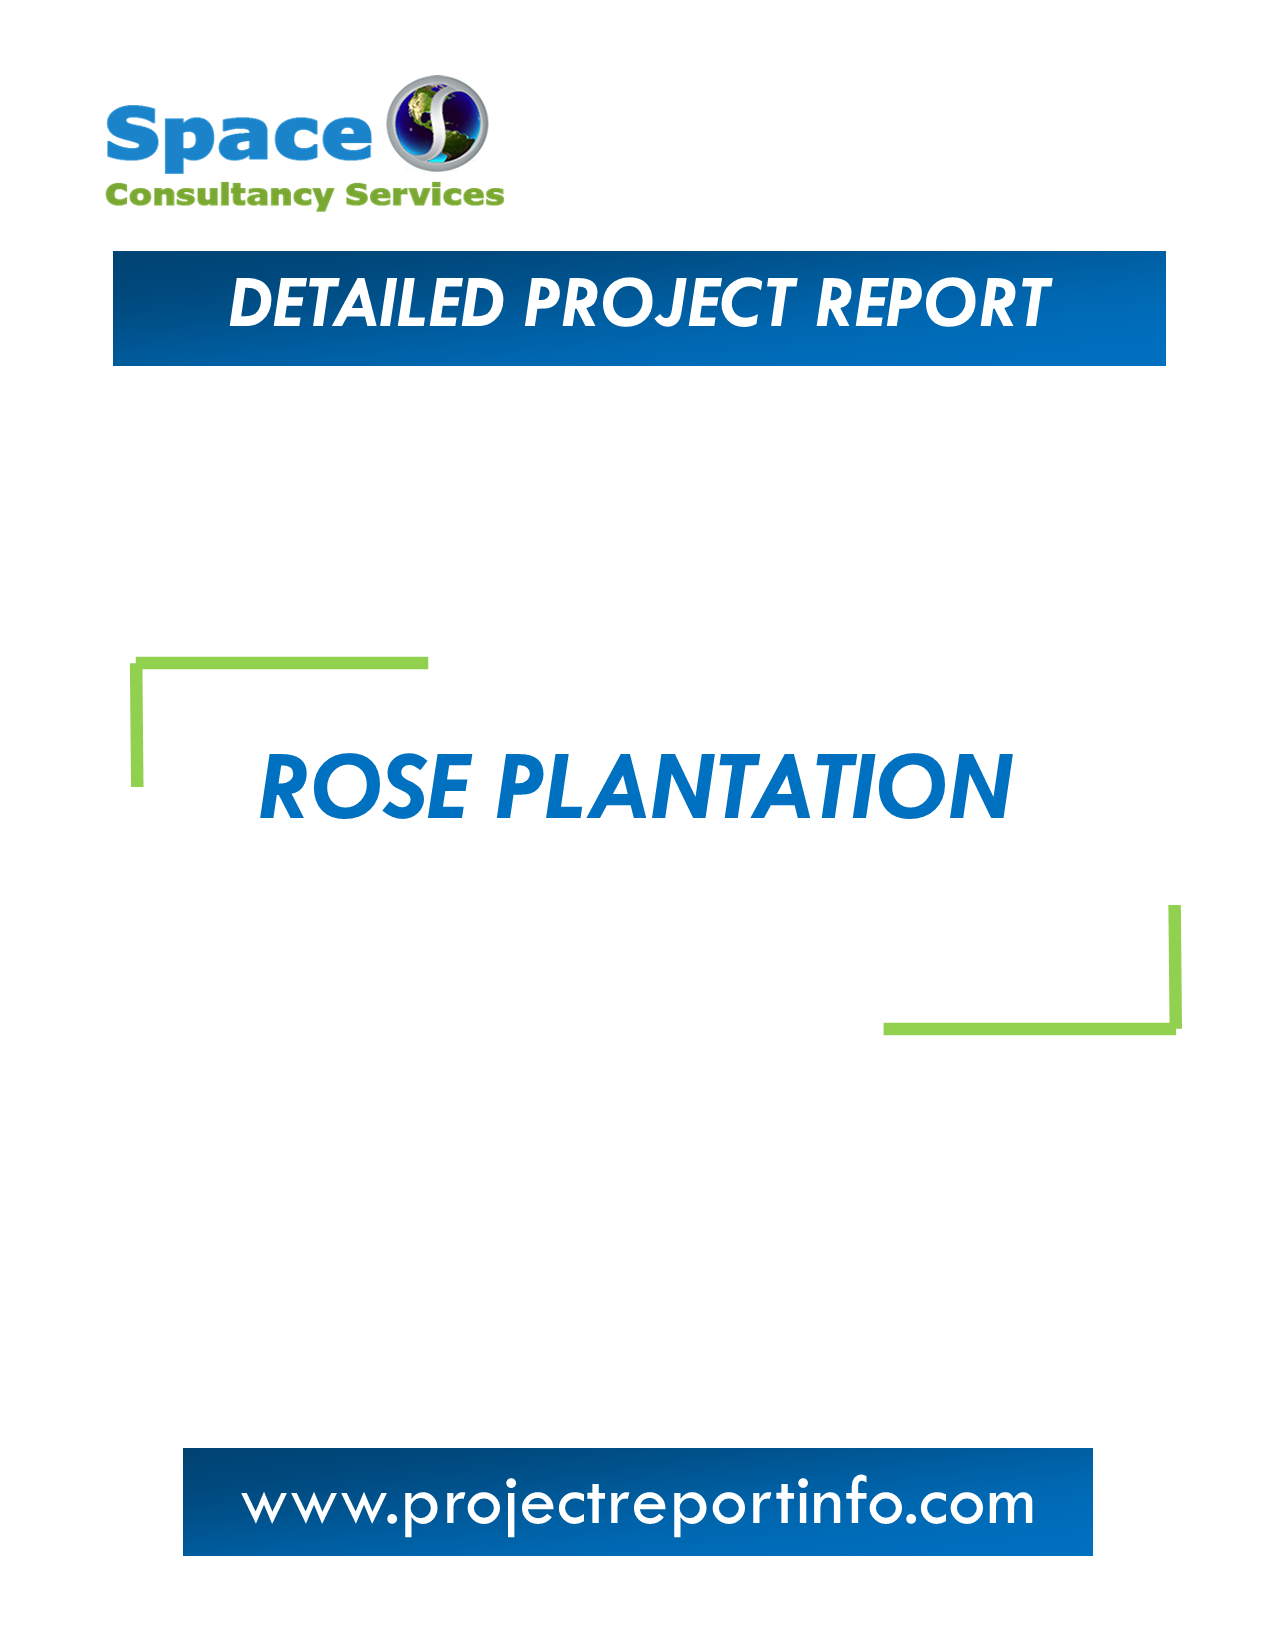 Project Report on Rose Plantation